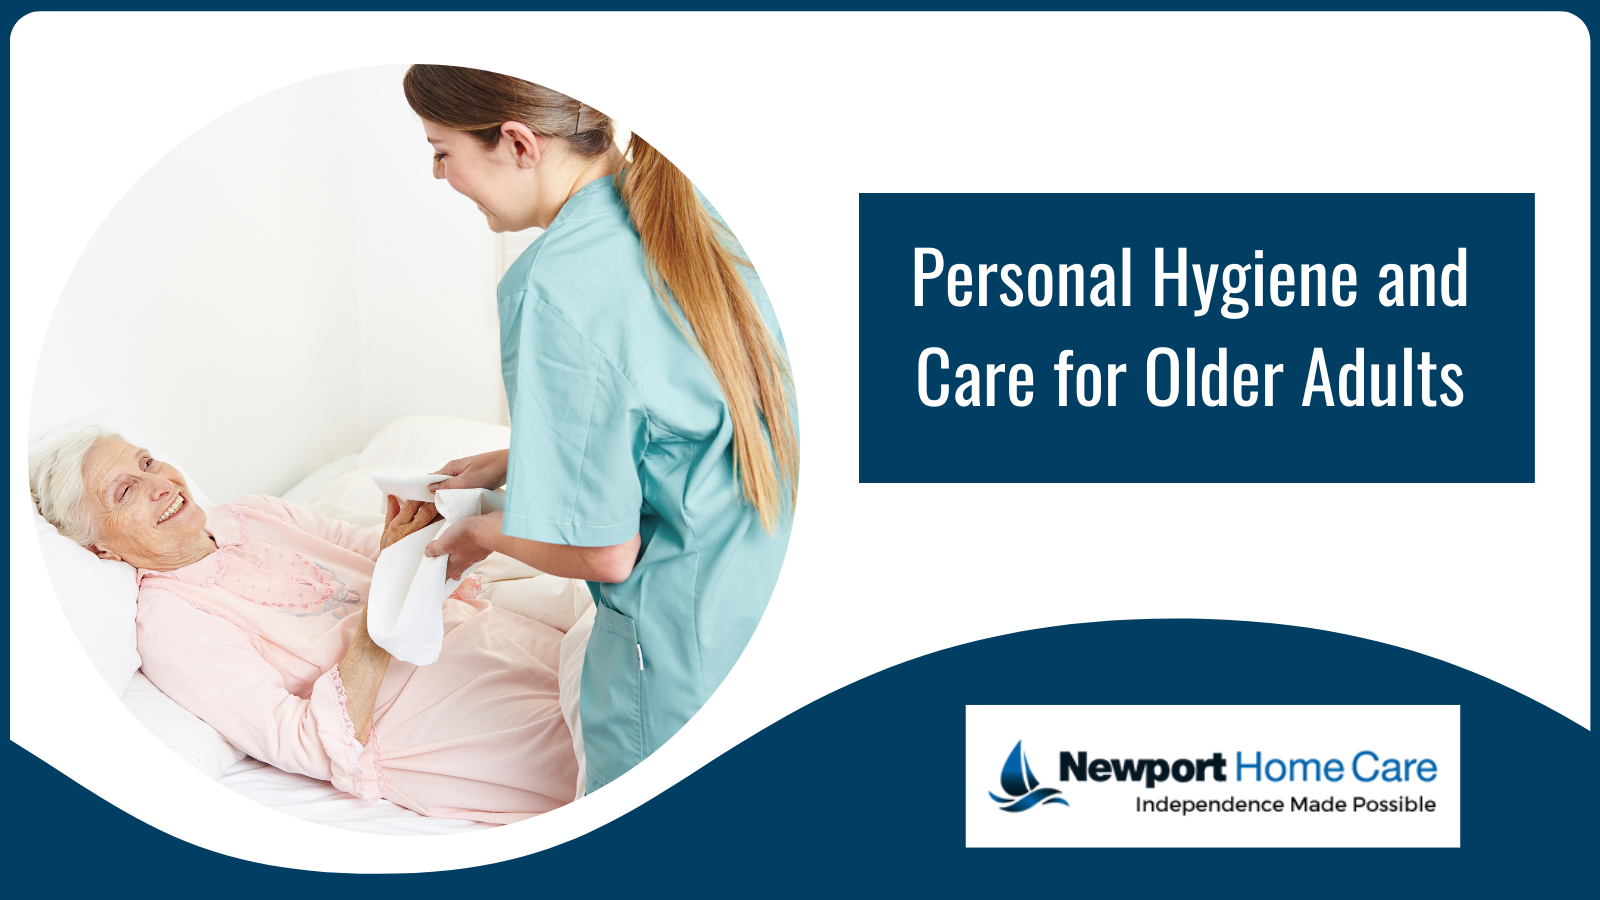 Personal Hygiene and Care for Older Adults